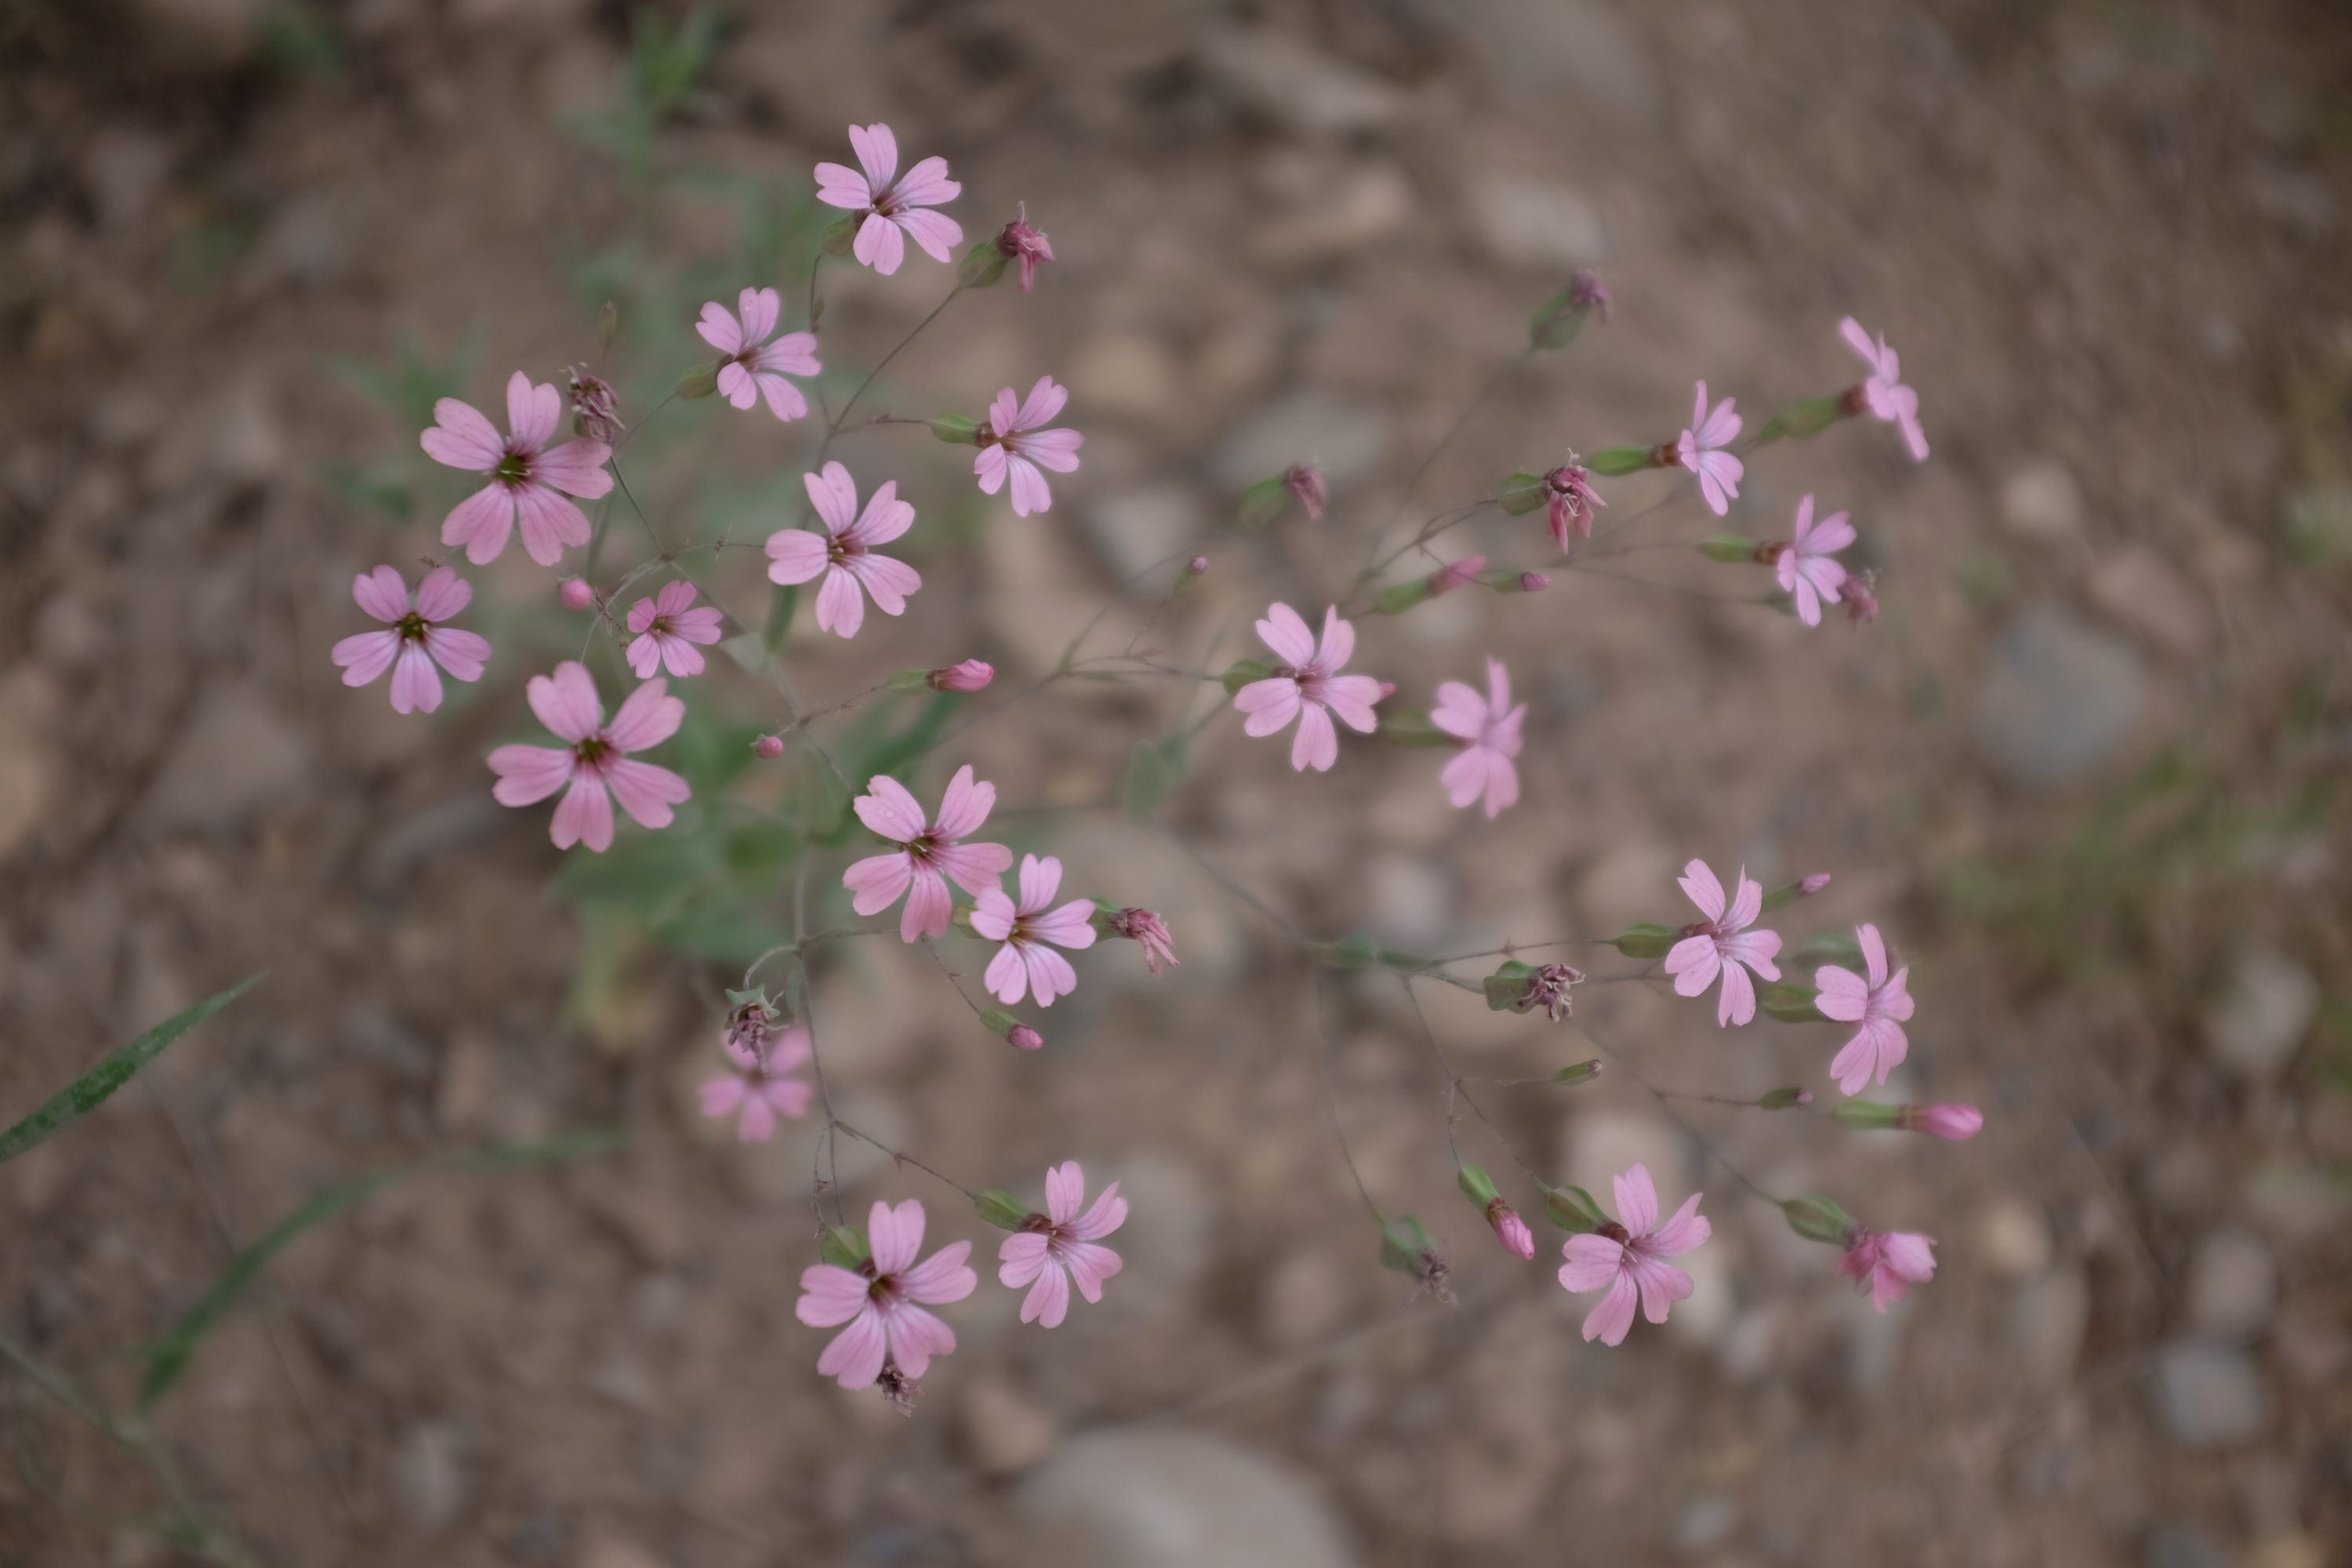 Closeup of small pink flowers.